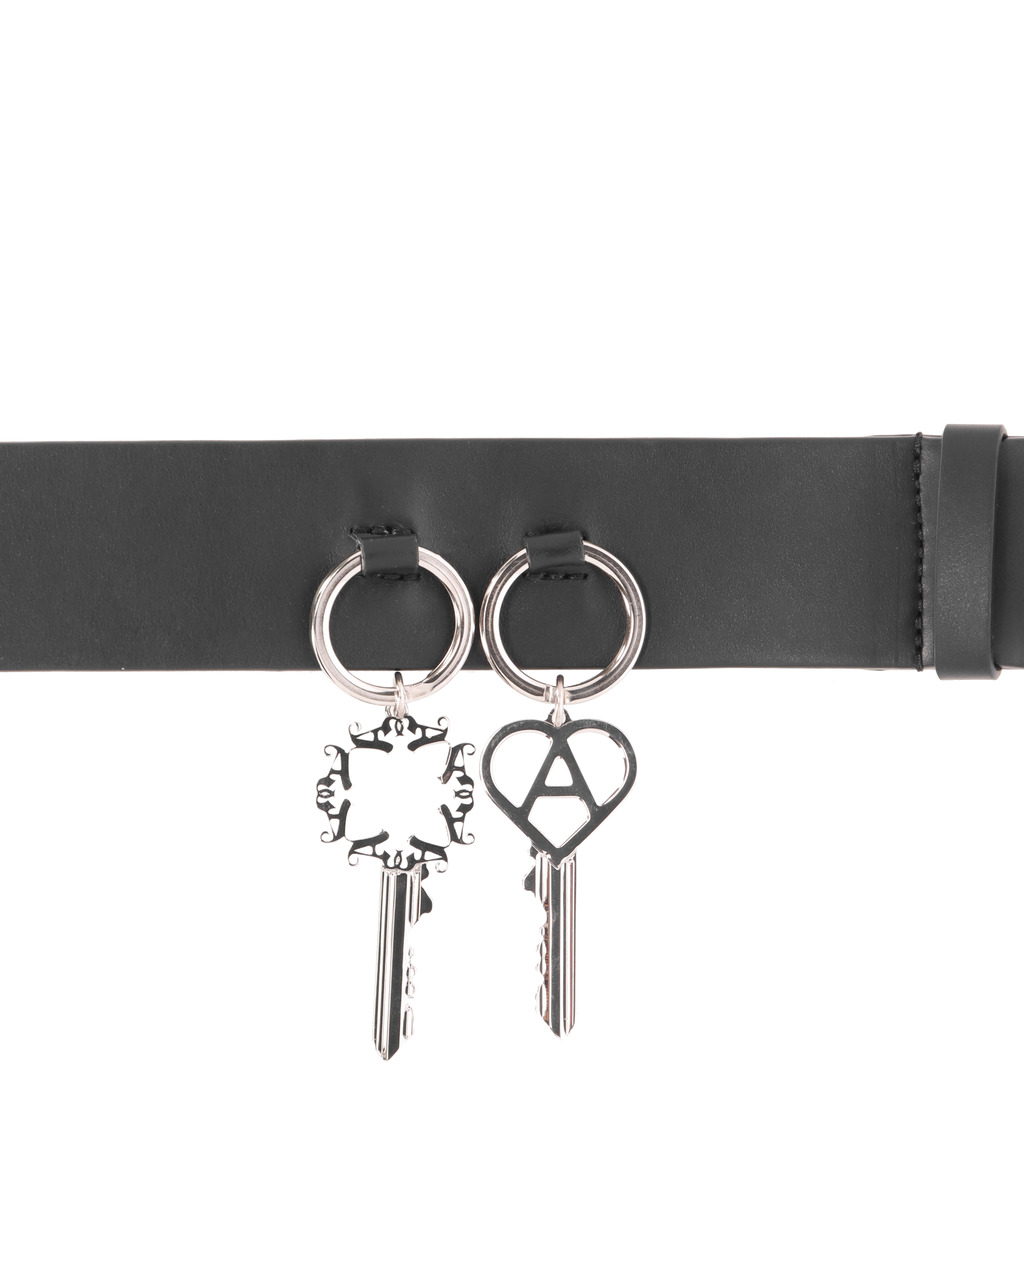 LEATHER BELT WITH KEY CHARMS - 4